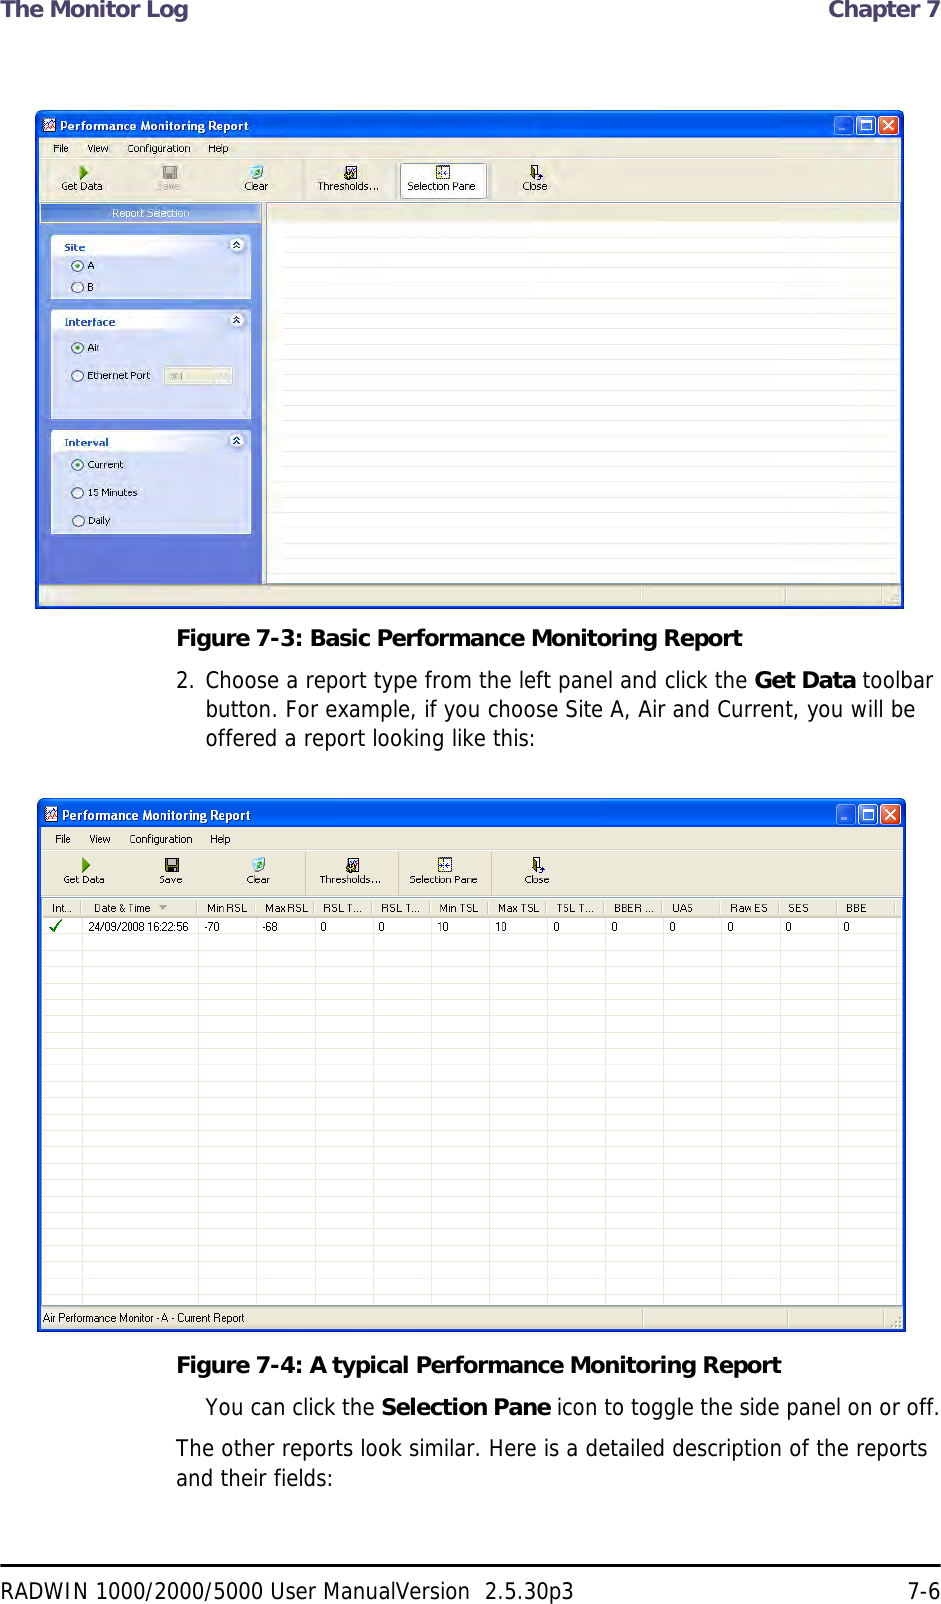 The Monitor Log  Chapter 7RADWIN 1000/2000/5000 User ManualVersion  2.5.30p3 7-6Figure 7-3: Basic Performance Monitoring Report2. Choose a report type from the left panel and click the Get Data toolbar button. For example, if you choose Site A, Air and Current, you will be offered a report looking like this:Figure 7-4: A typical Performance Monitoring ReportYou can click the Selection Pane icon to toggle the side panel on or off.The other reports look similar. Here is a detailed description of the reports and their fields: